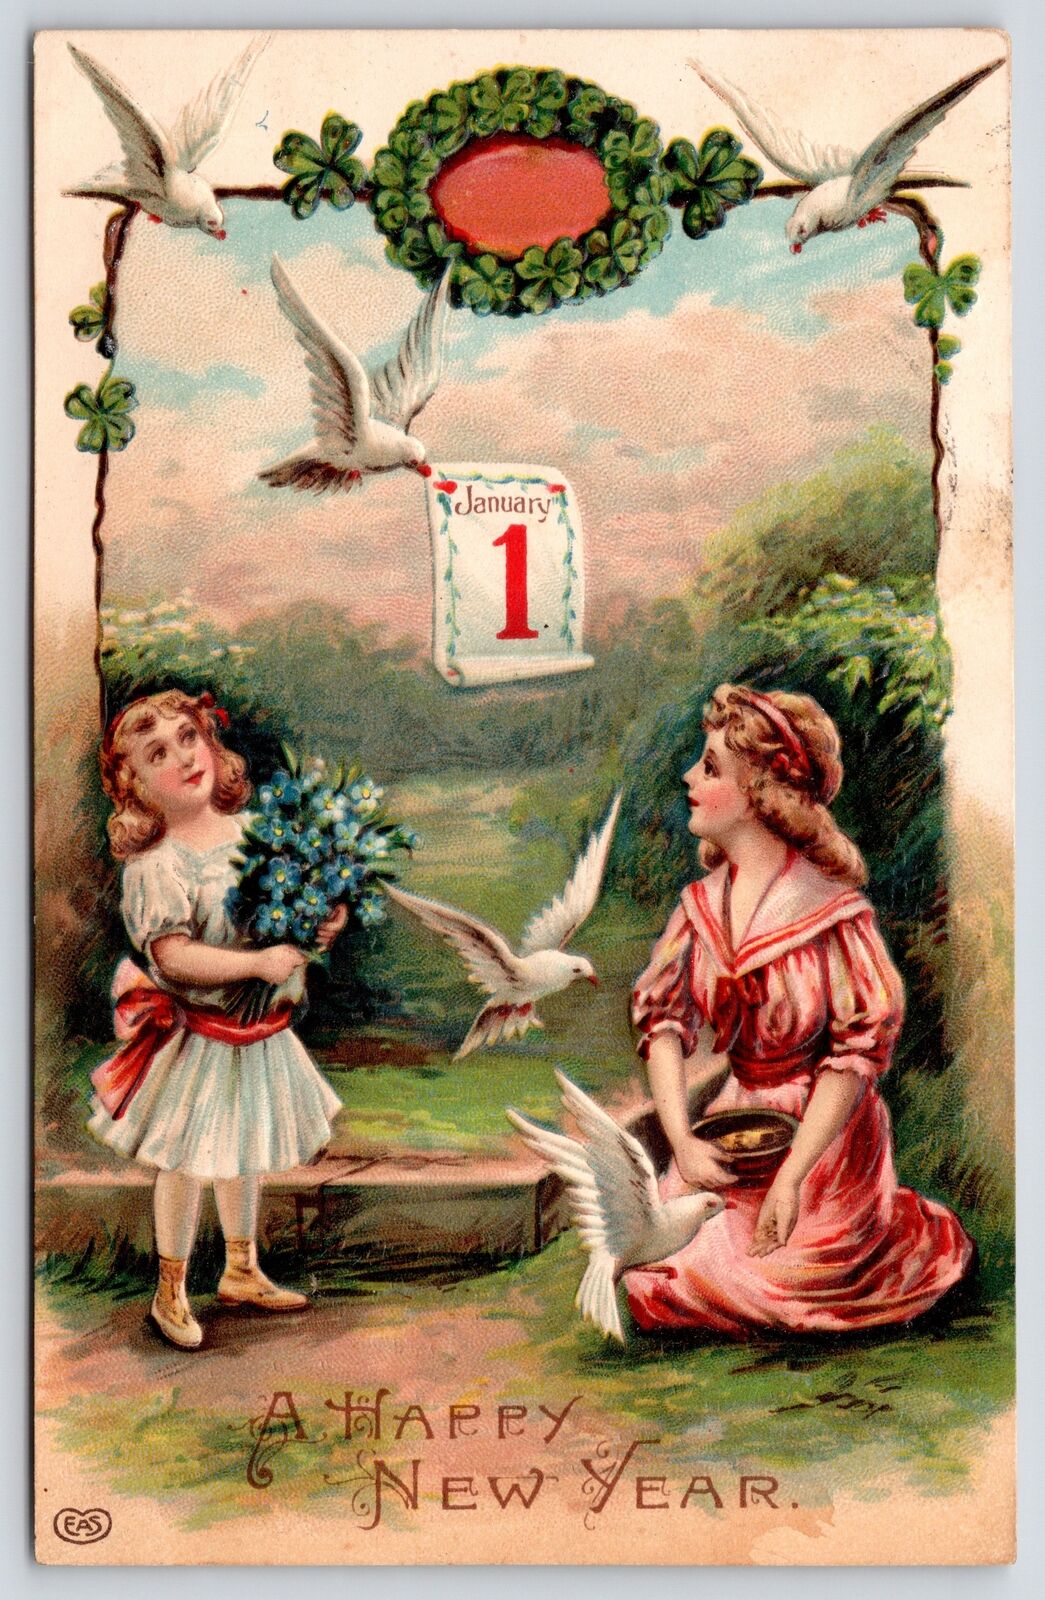 EAS New Year~Pretty Lady Feeds Doves Flowers~Lil Girl Holds Flowers~Jan 1~1910